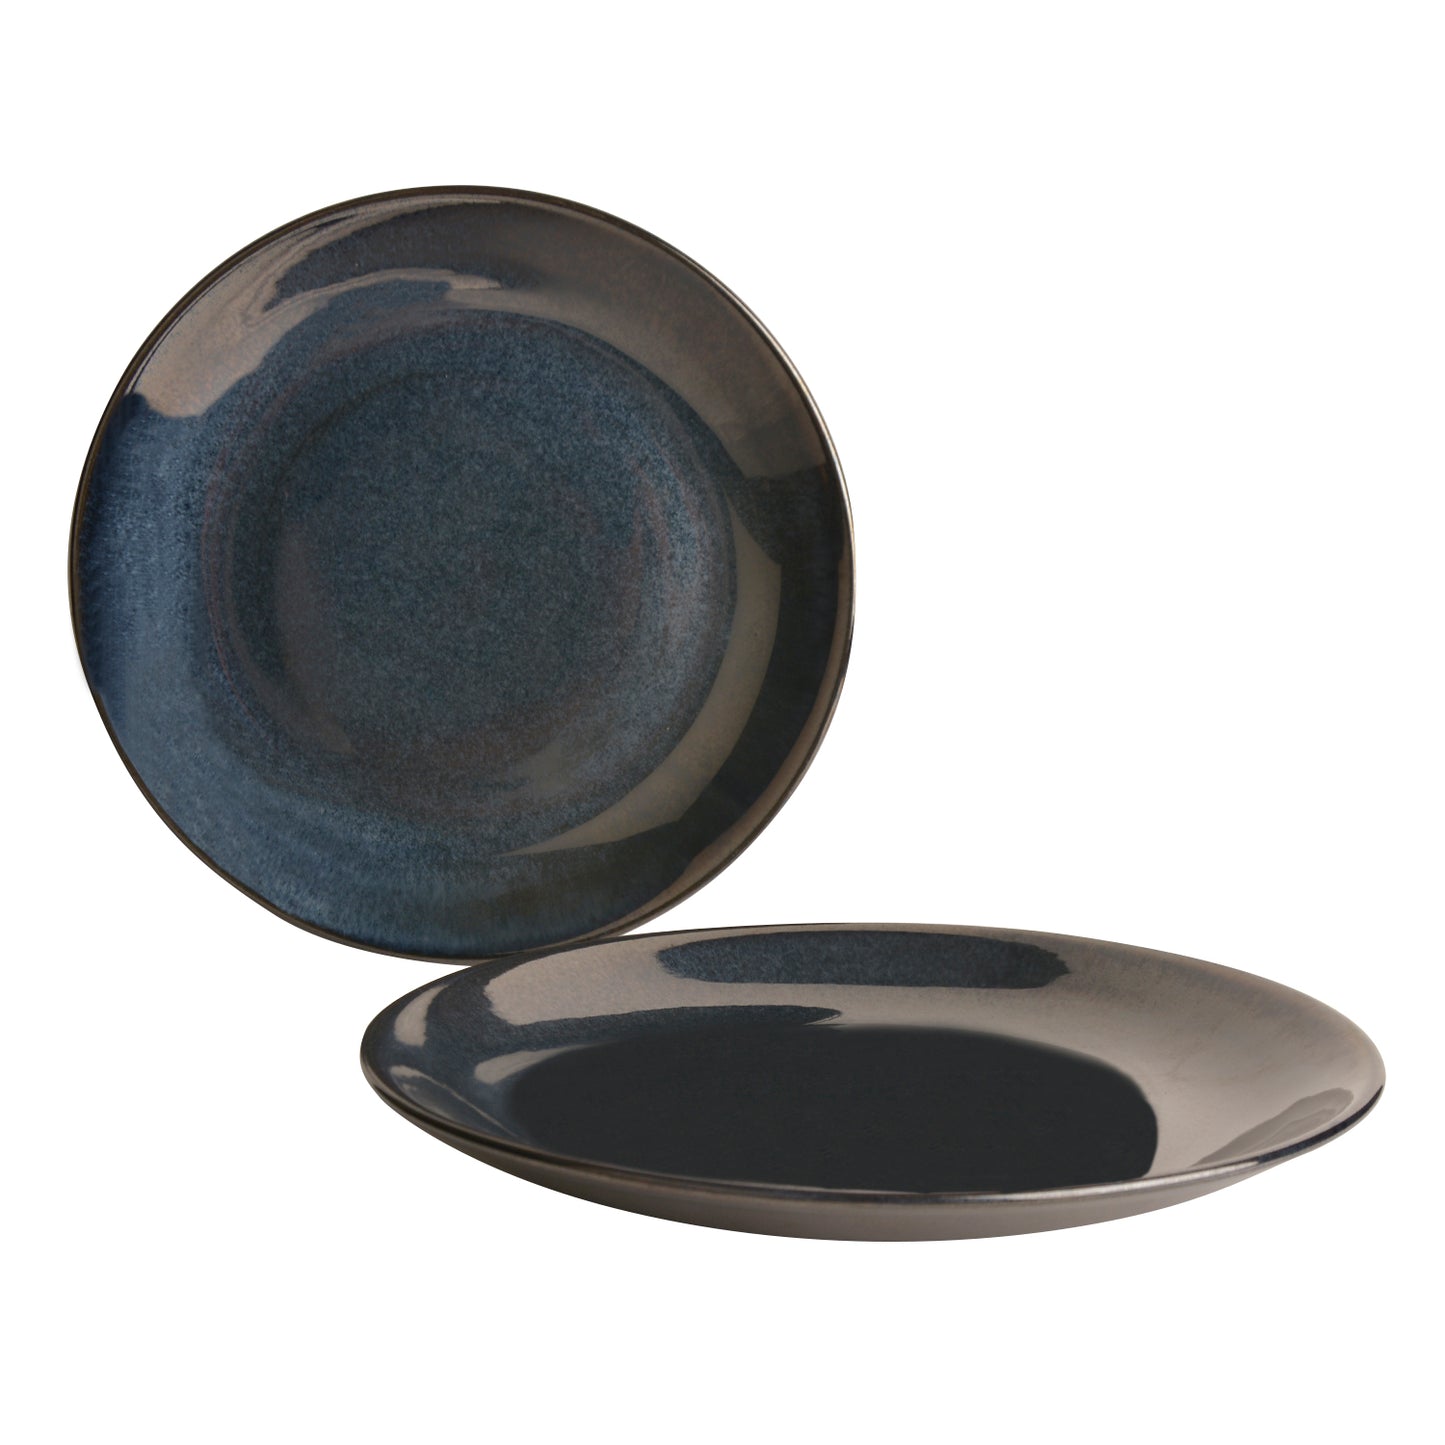 "The Luxe Ceramic Hand Glazed Dinner Serving Plates (10 inches, Set of 2, Navy Blue)